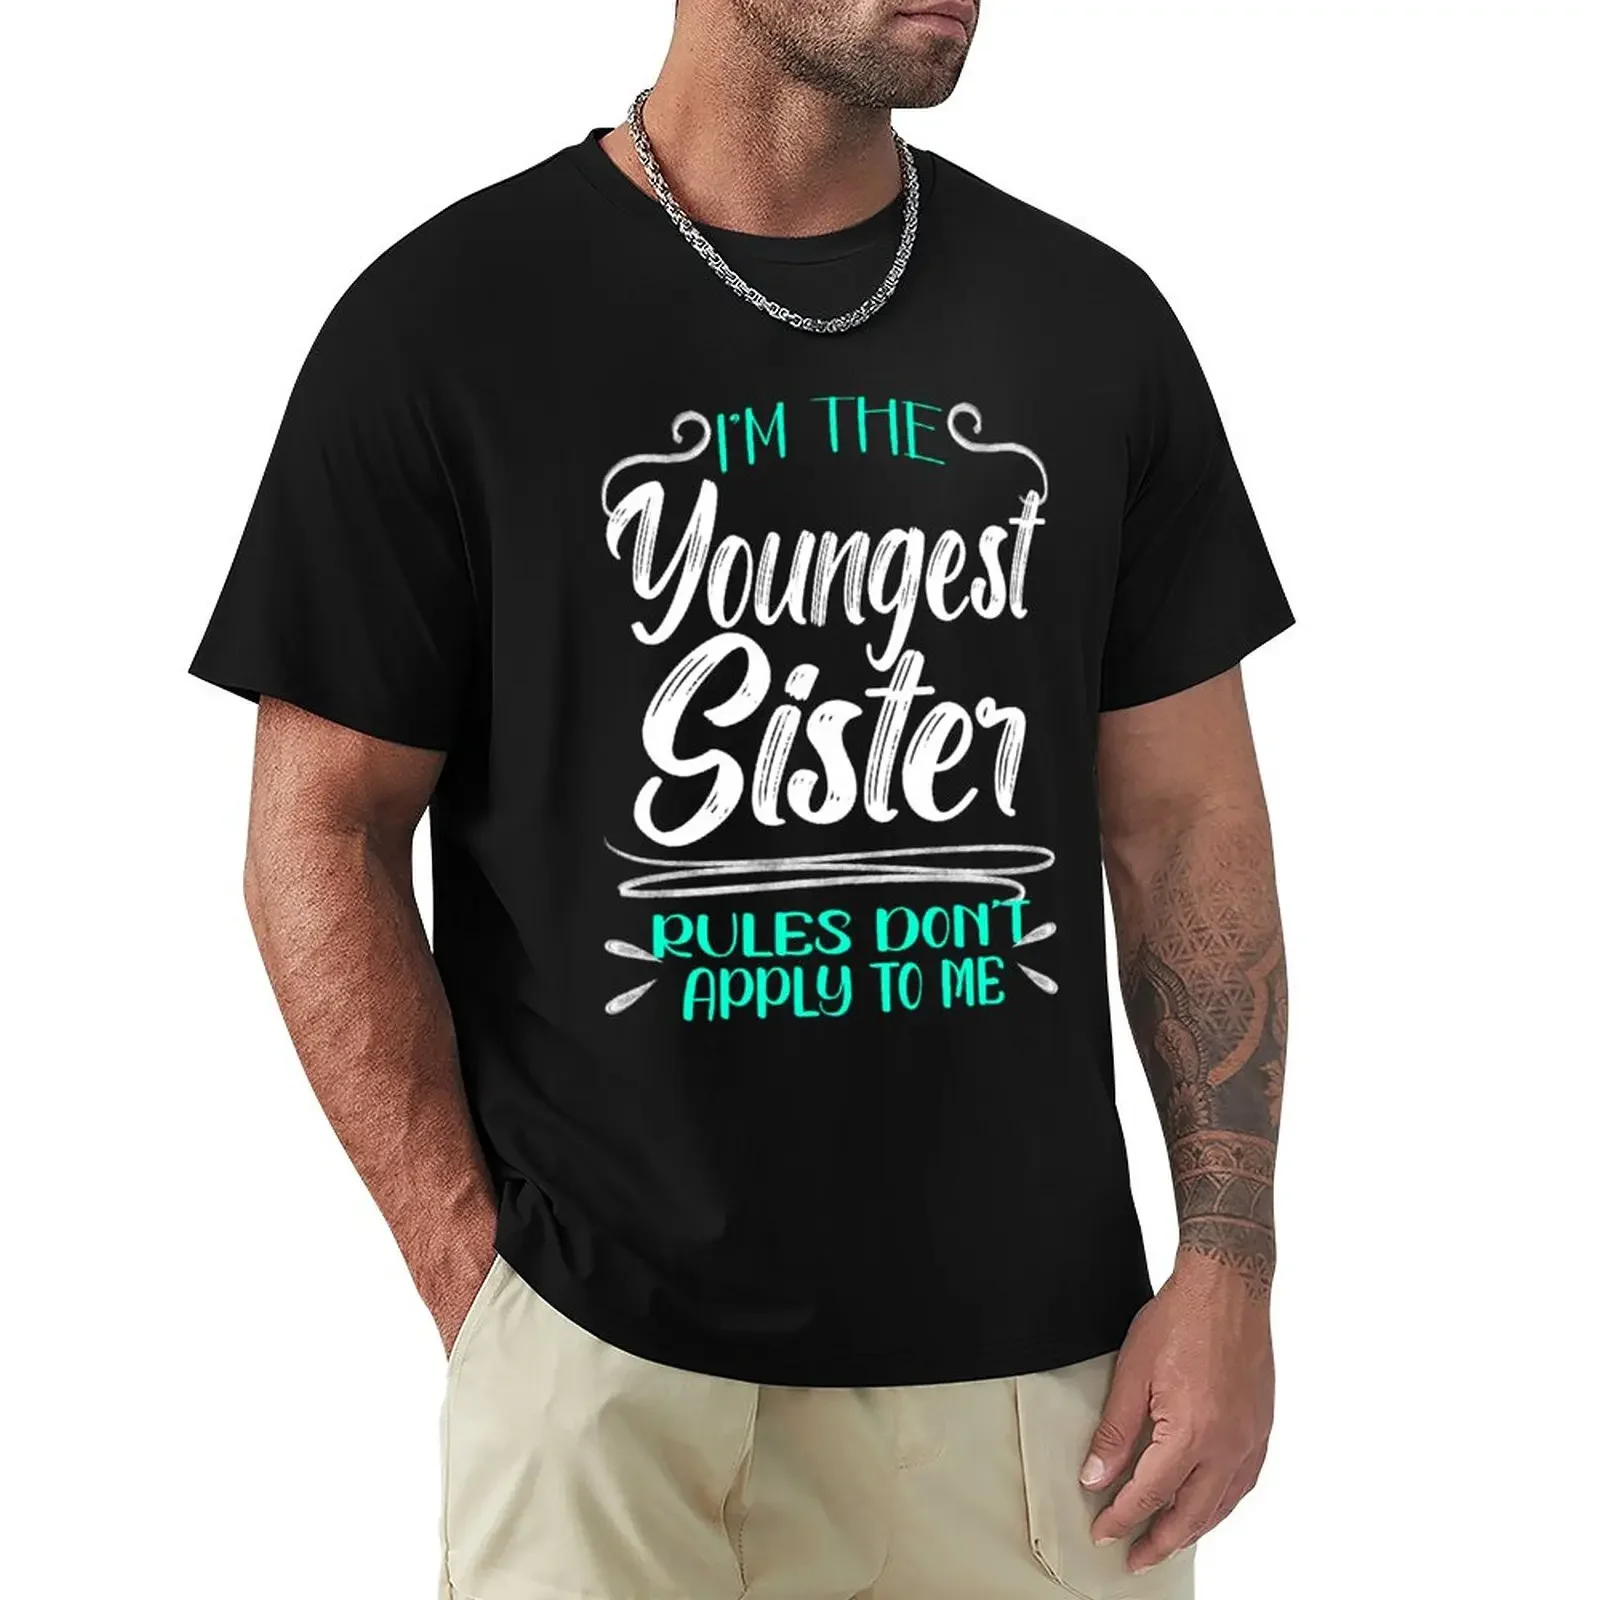 

I'm The Youngest Sister Rules Don't Apply To me, Funny Family Quote T-Shirt blacks funnys Blouse black t shirts for men